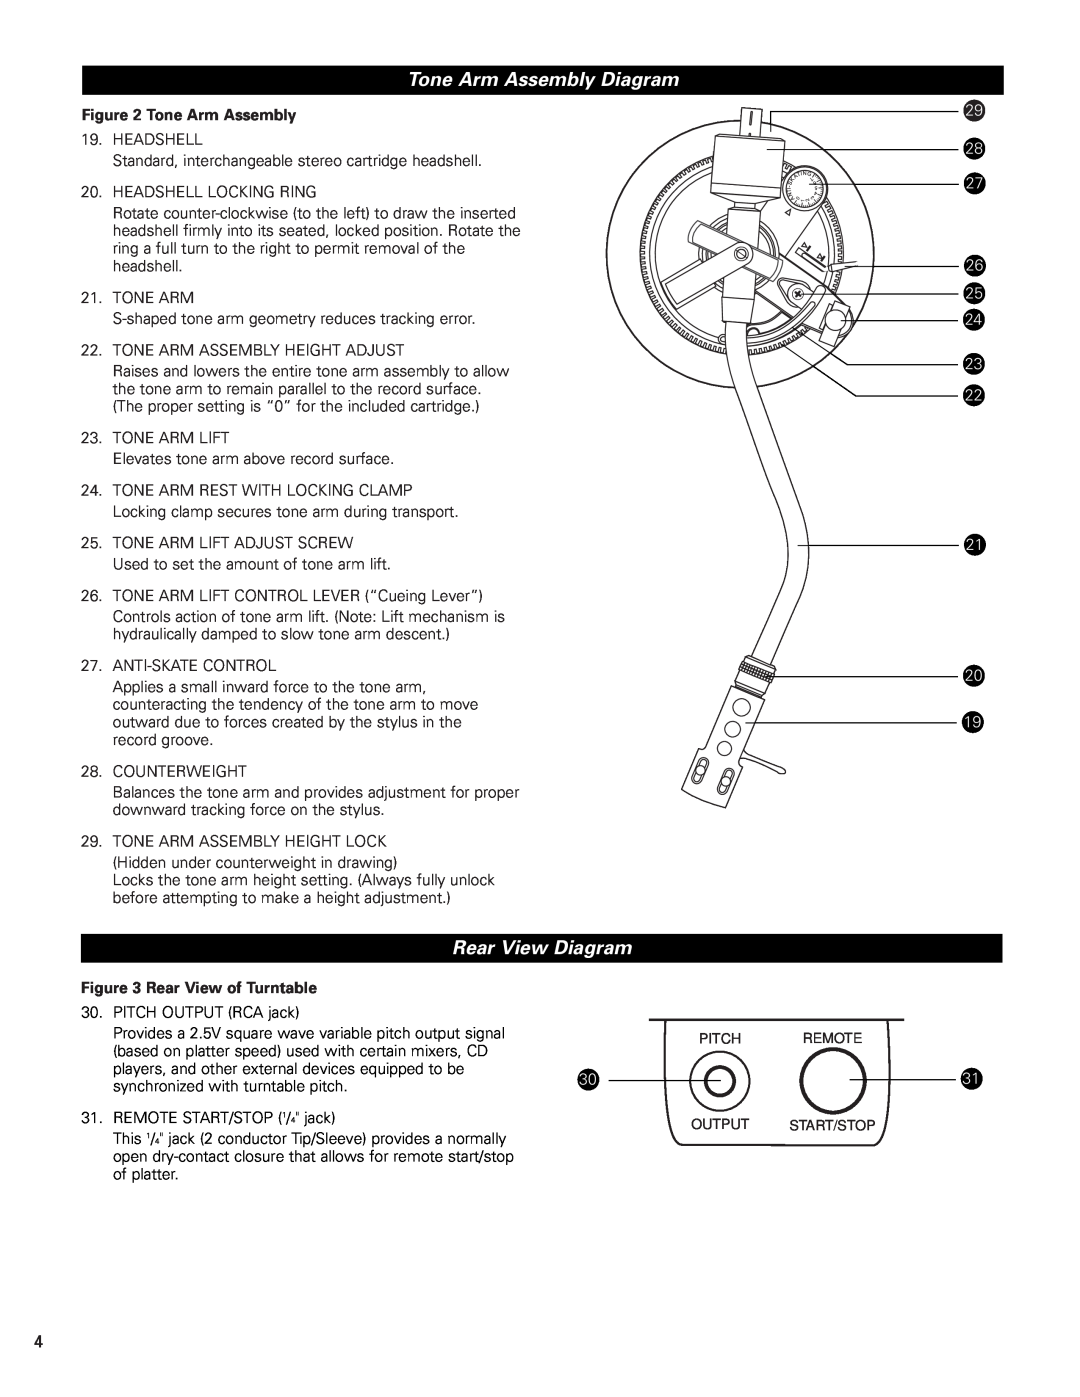 Audio-Technica AT-PL120 manual Tone Arm Assembly Diagram, Rear View Diagram, Rear View of Turntable 